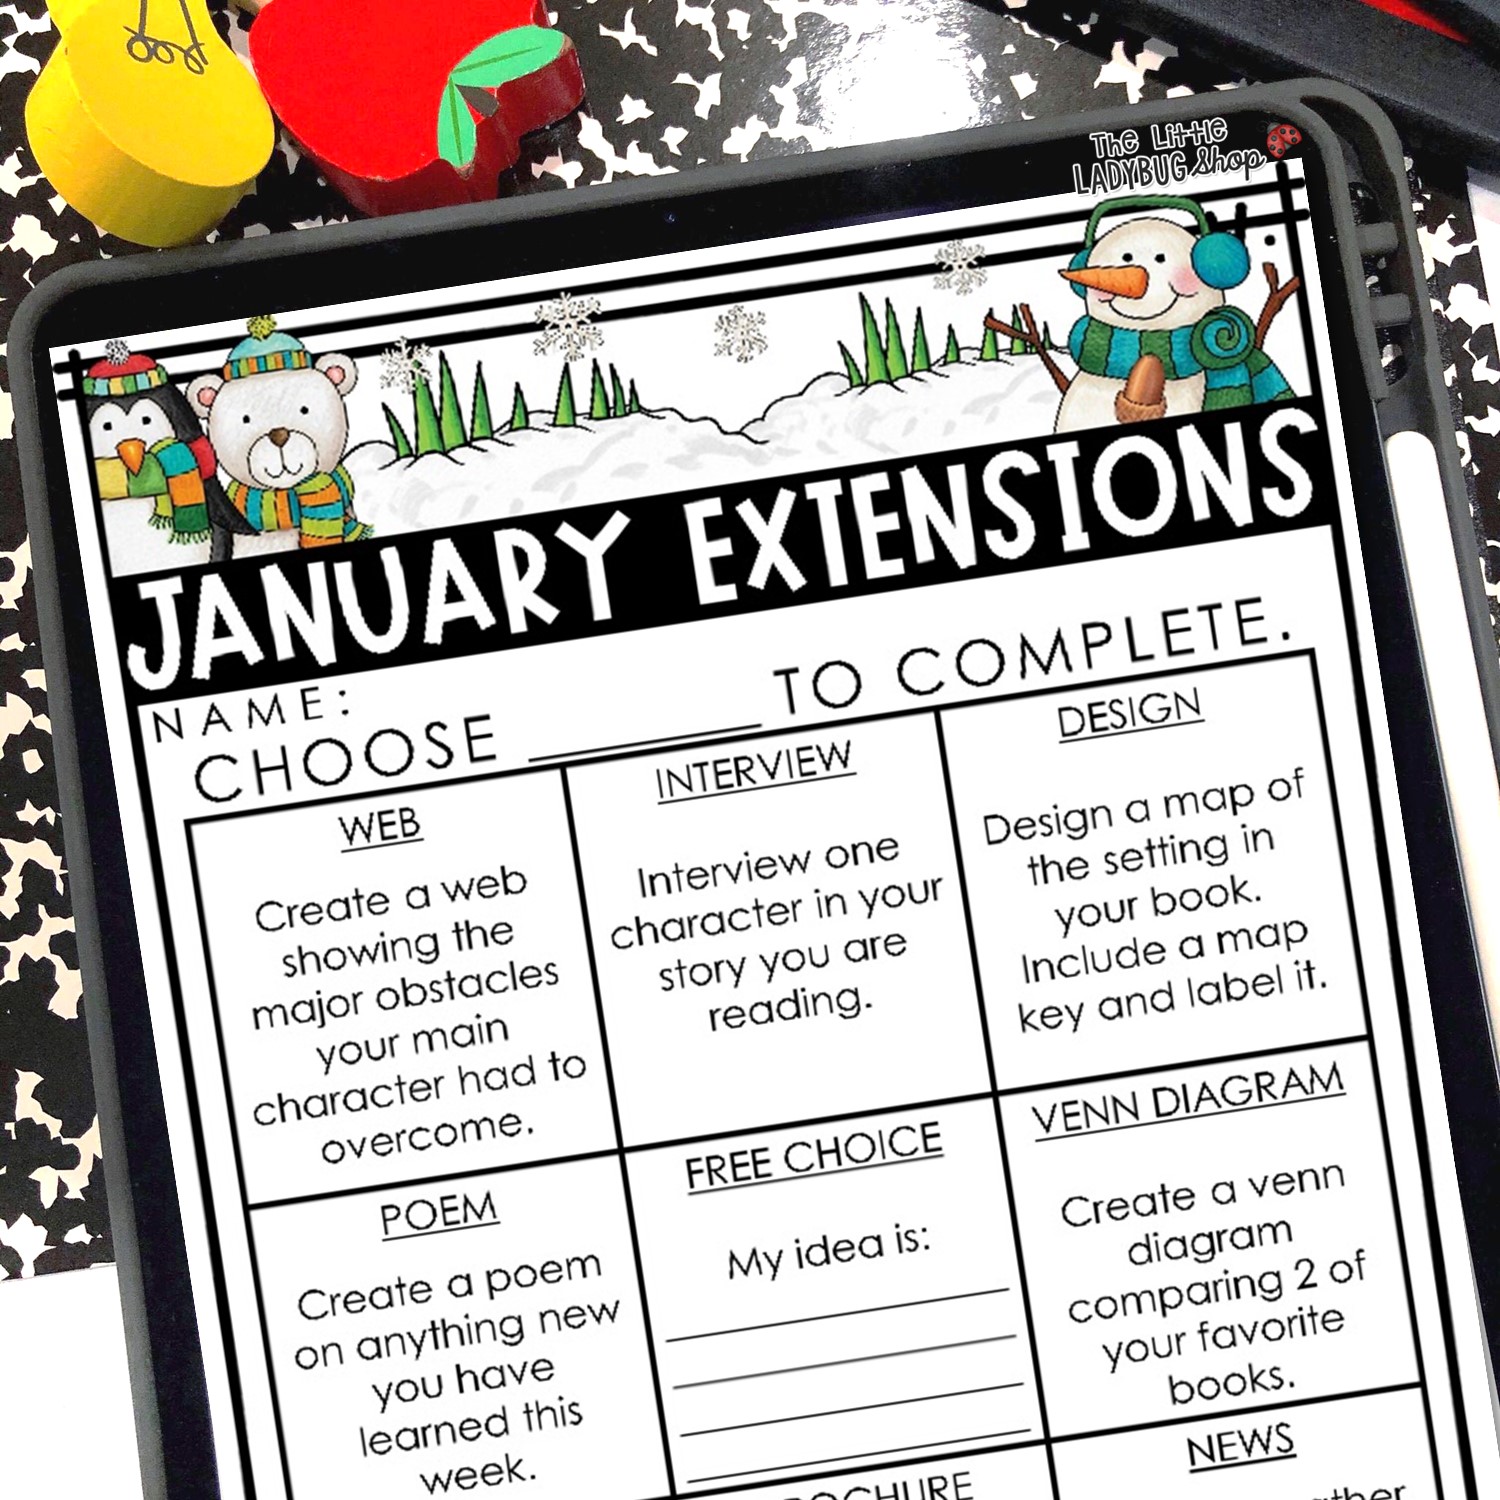 Choice Boards & Menus in the Upper Elementary Classroom